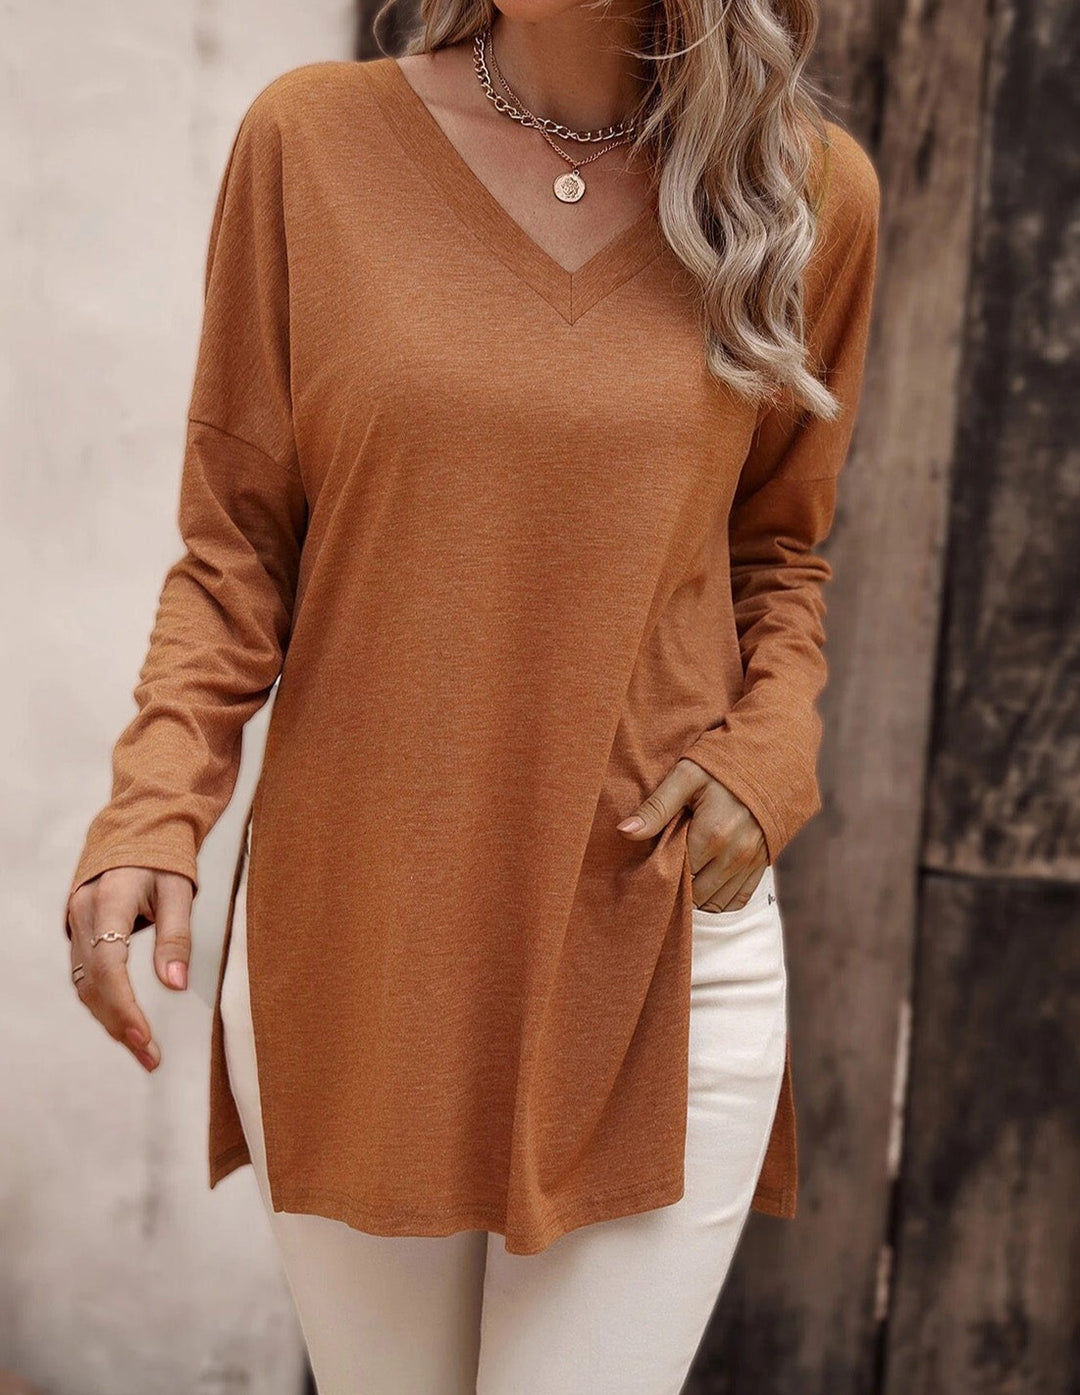 Leaves are Changing Knit Top - Cheeky Chic Boutique